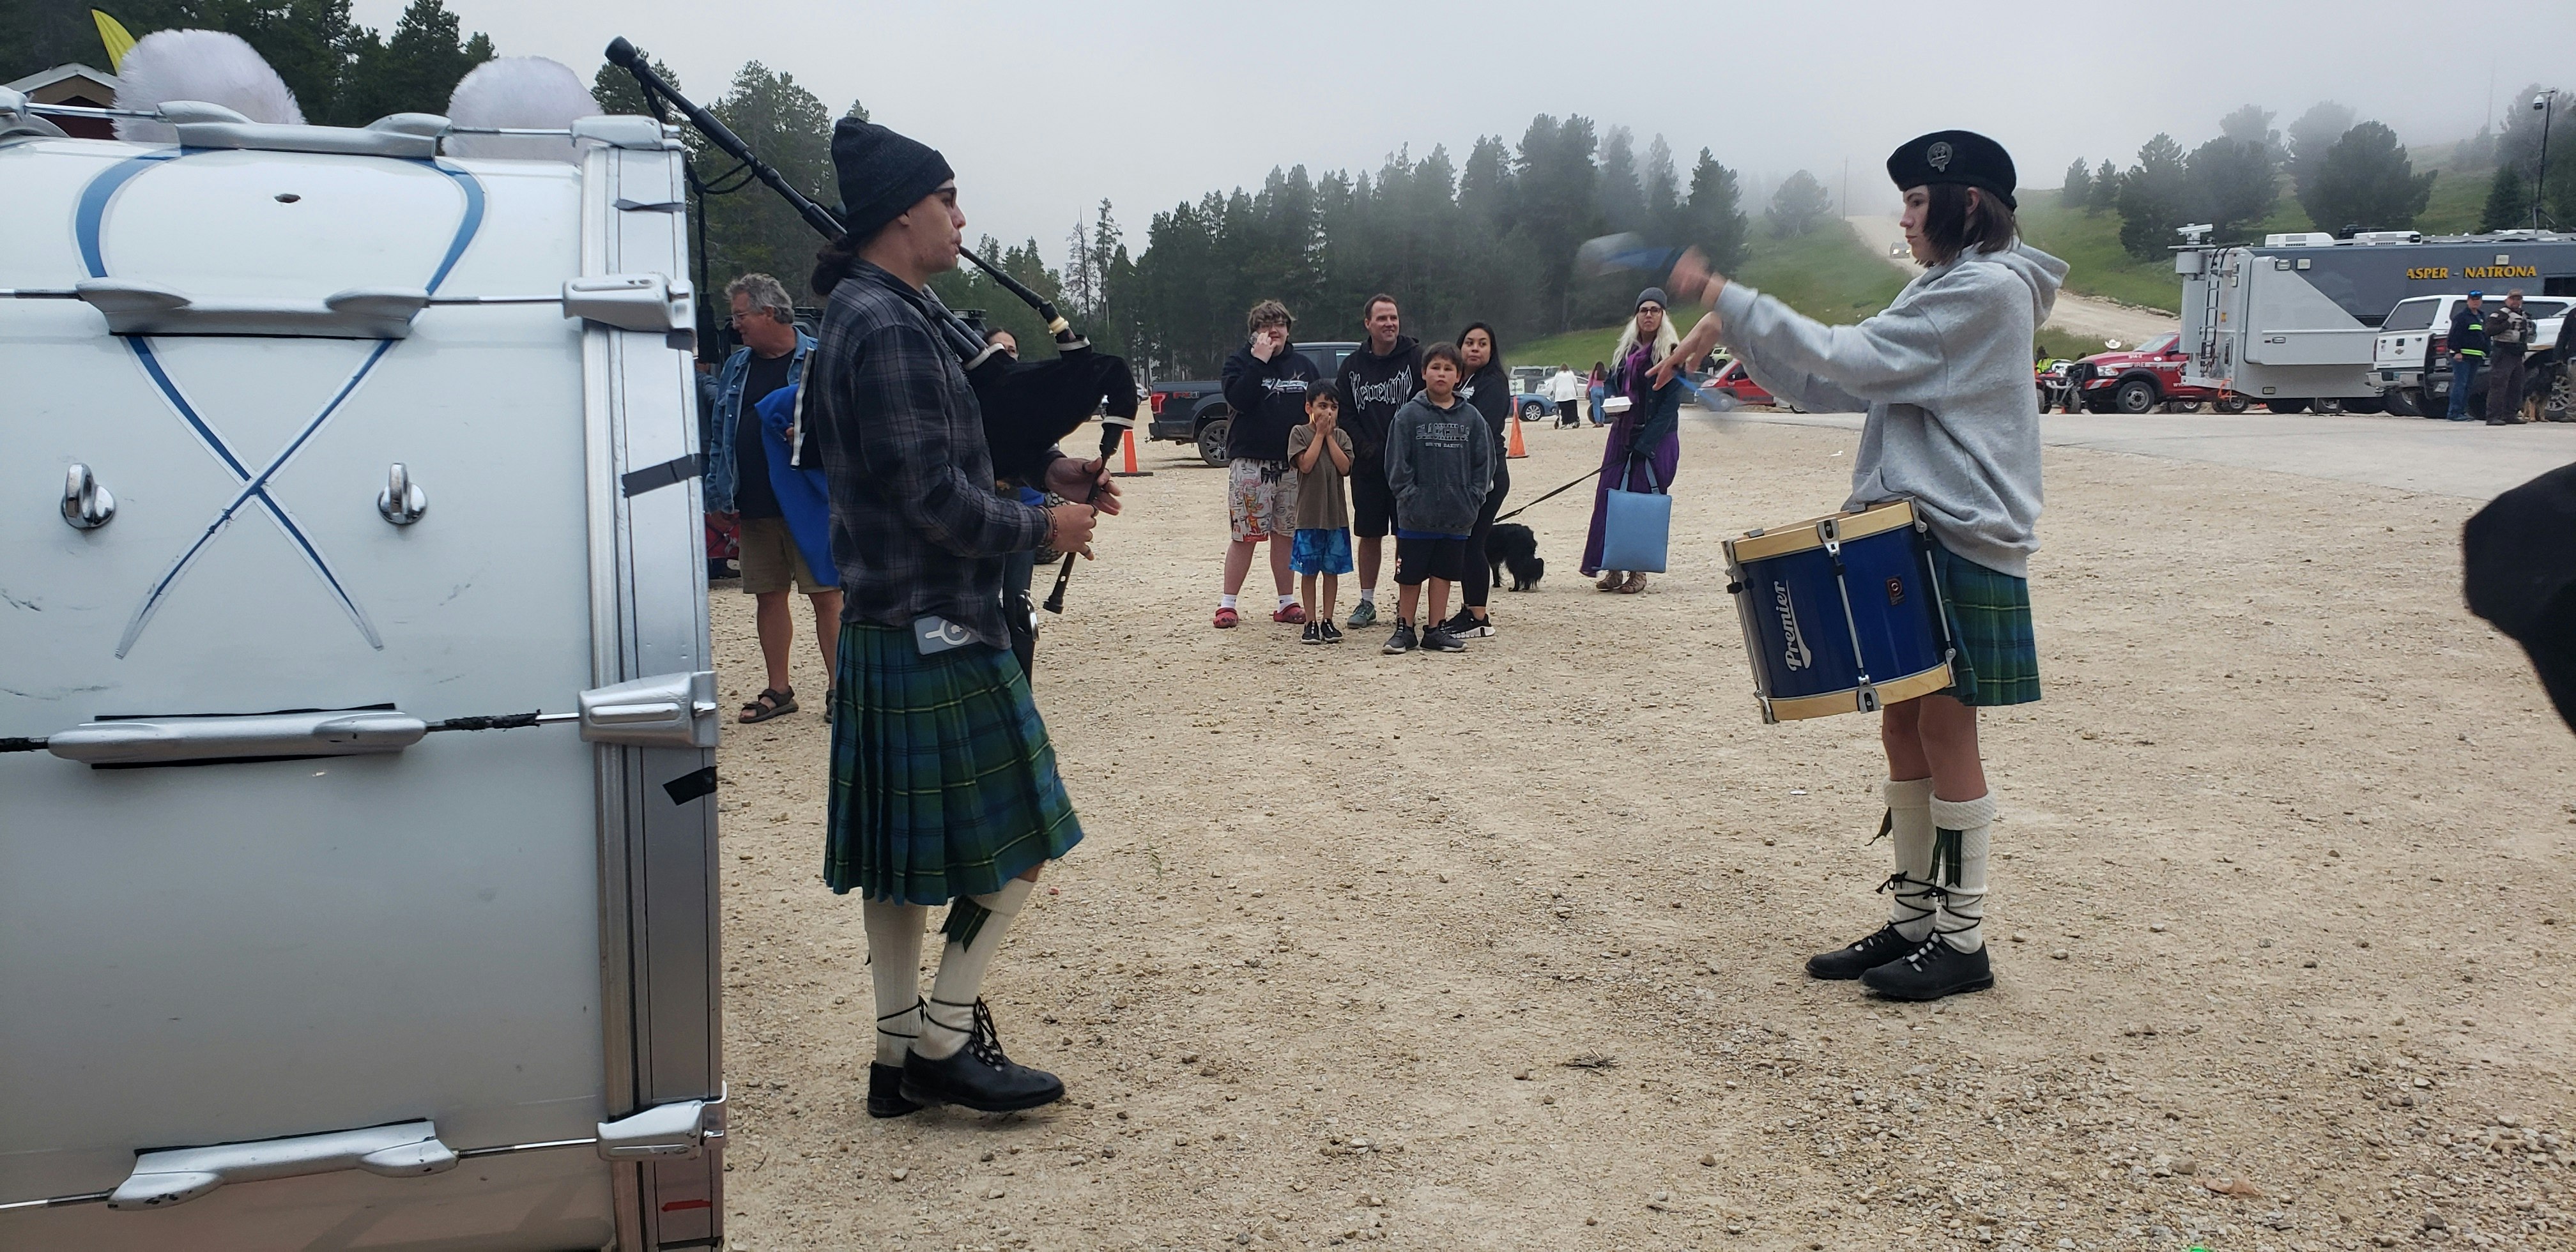 A drummer twirls his sticks while a bagpiper plays.